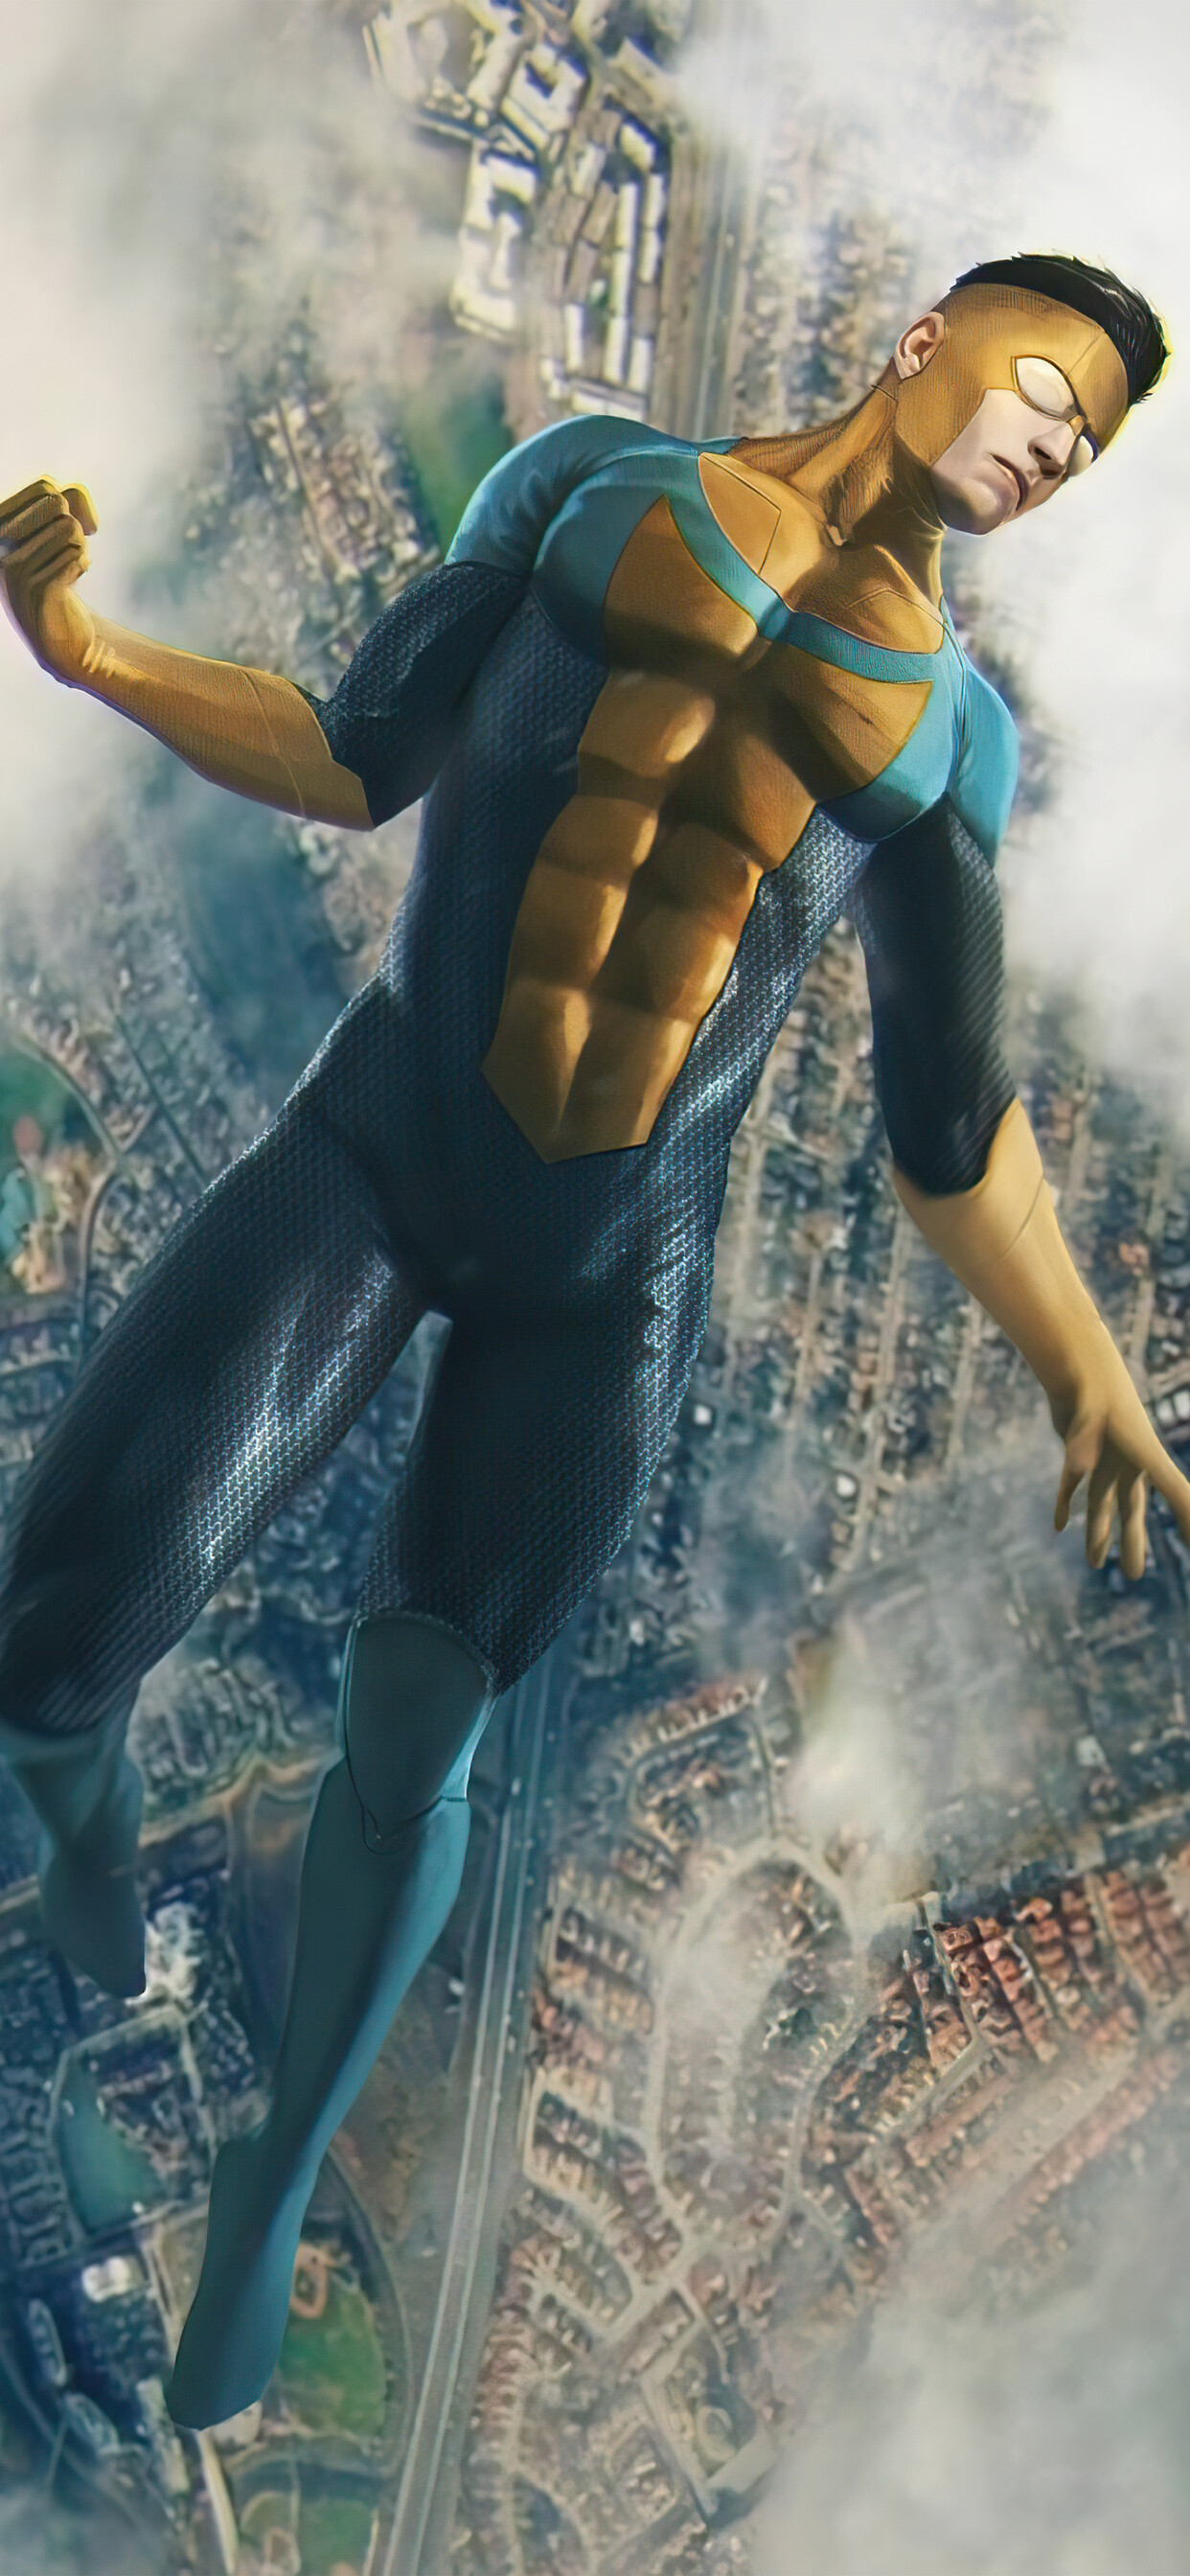 Invincible TV series, Iphone xs max, HD 4k wallpapers, Images backgrounds, 1250x2690 HD Phone